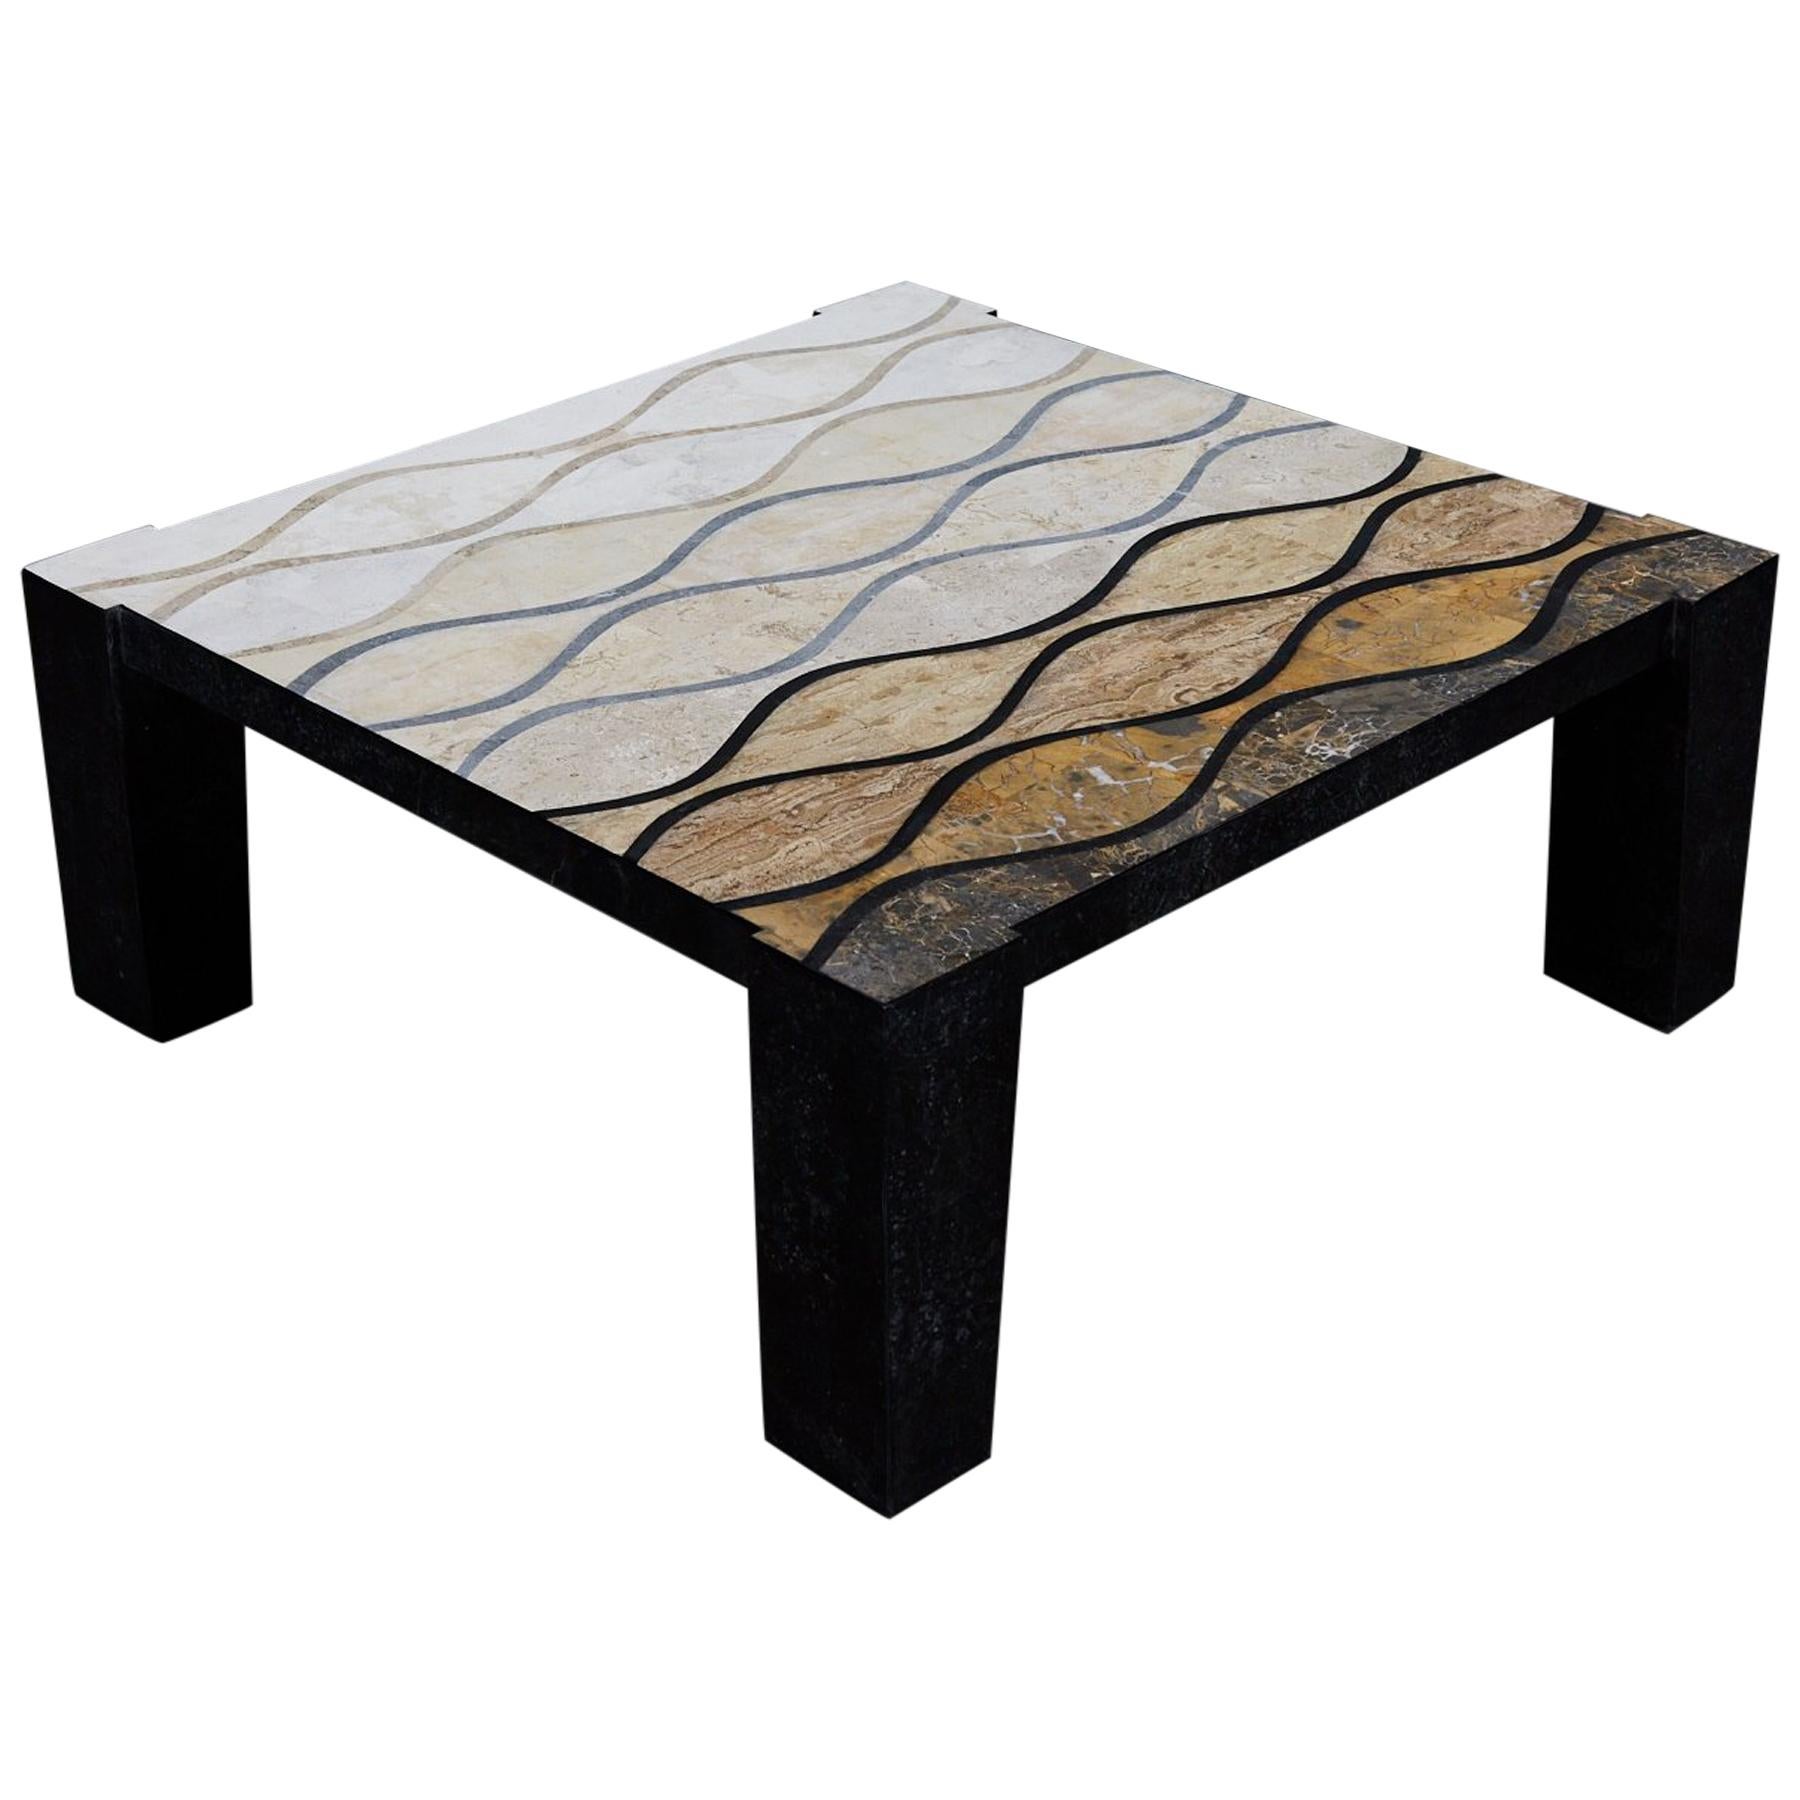 Tessellated Stone "Curves" Cocktail Table with Abstract Inlaid Detailing, 1990s For Sale